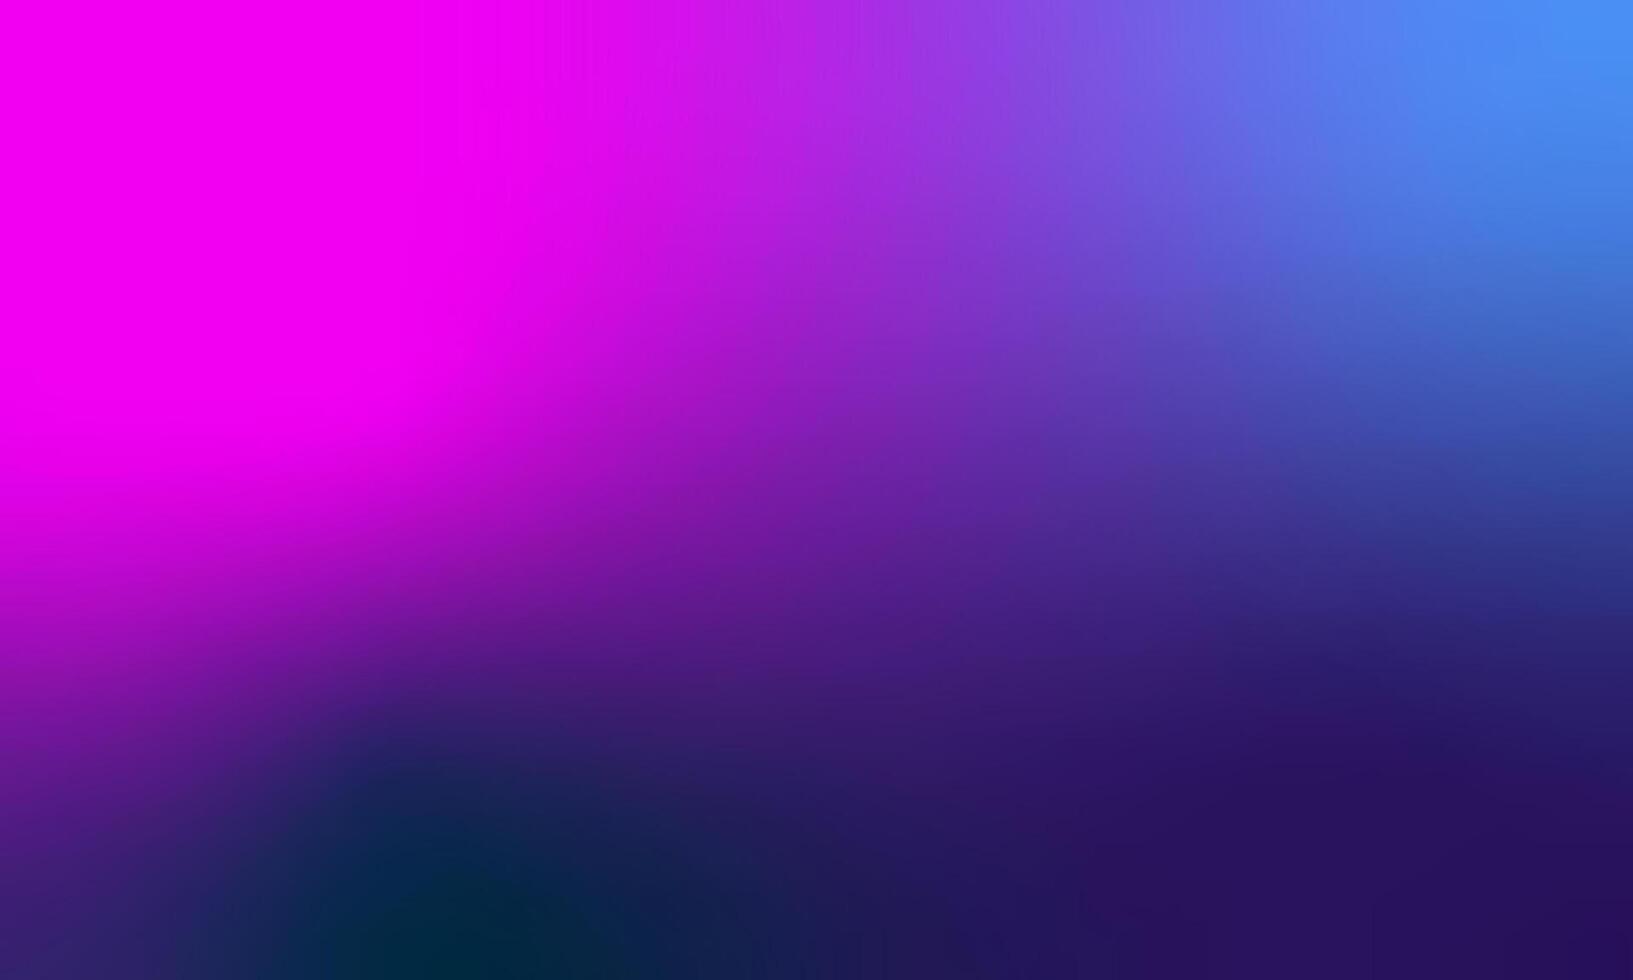 Blue and Purple Gradient Abstract Blurred Background vector